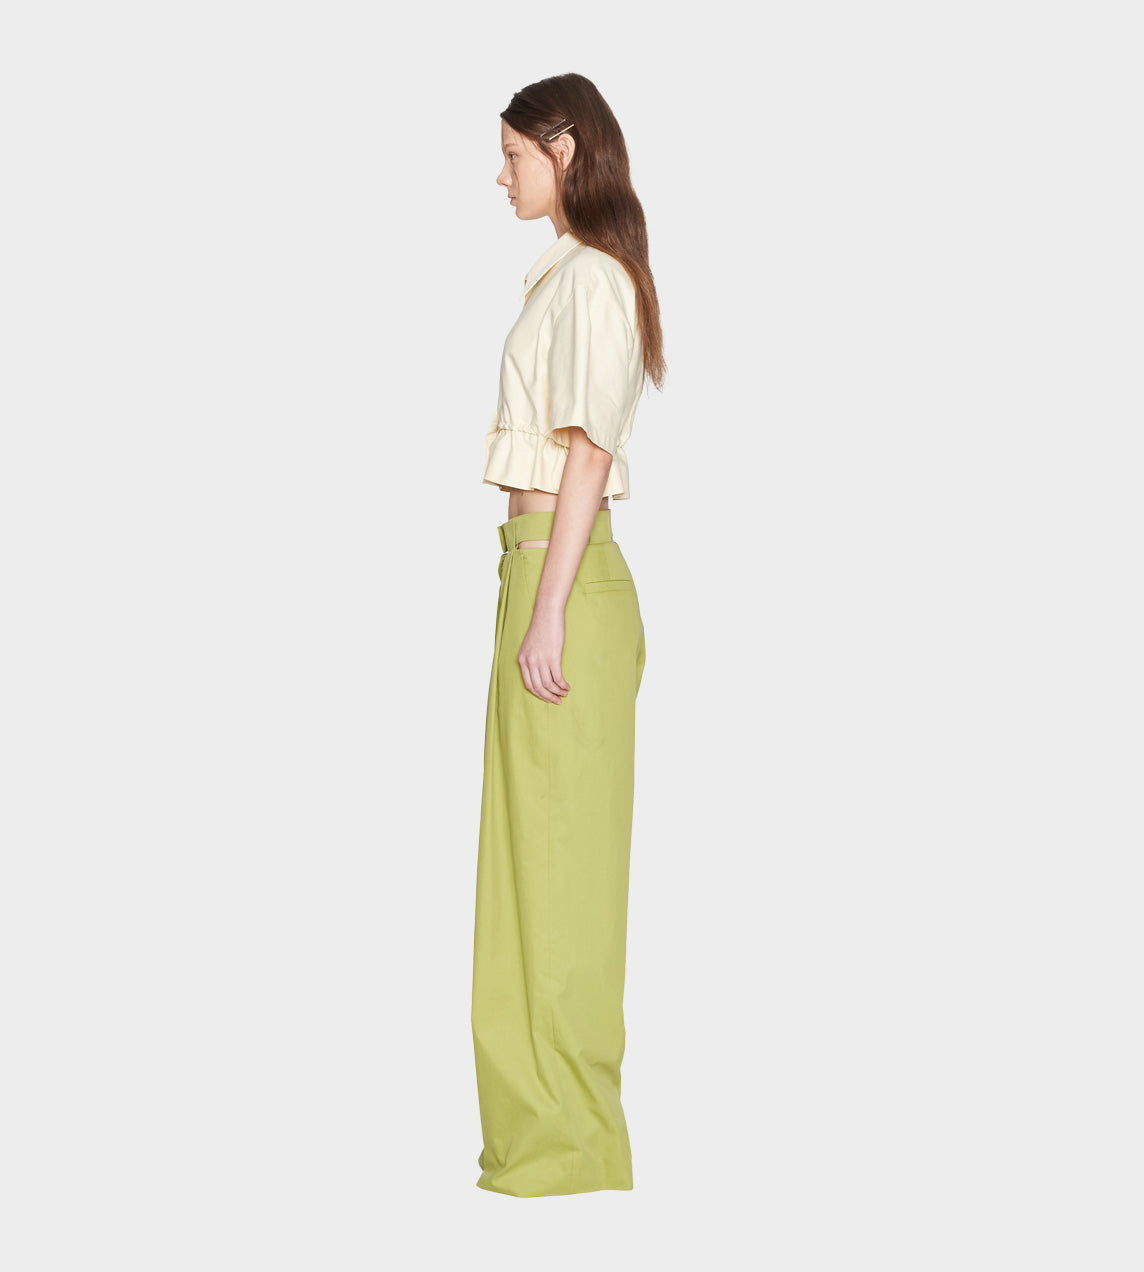 System - Cut-out Waistband Pants Green